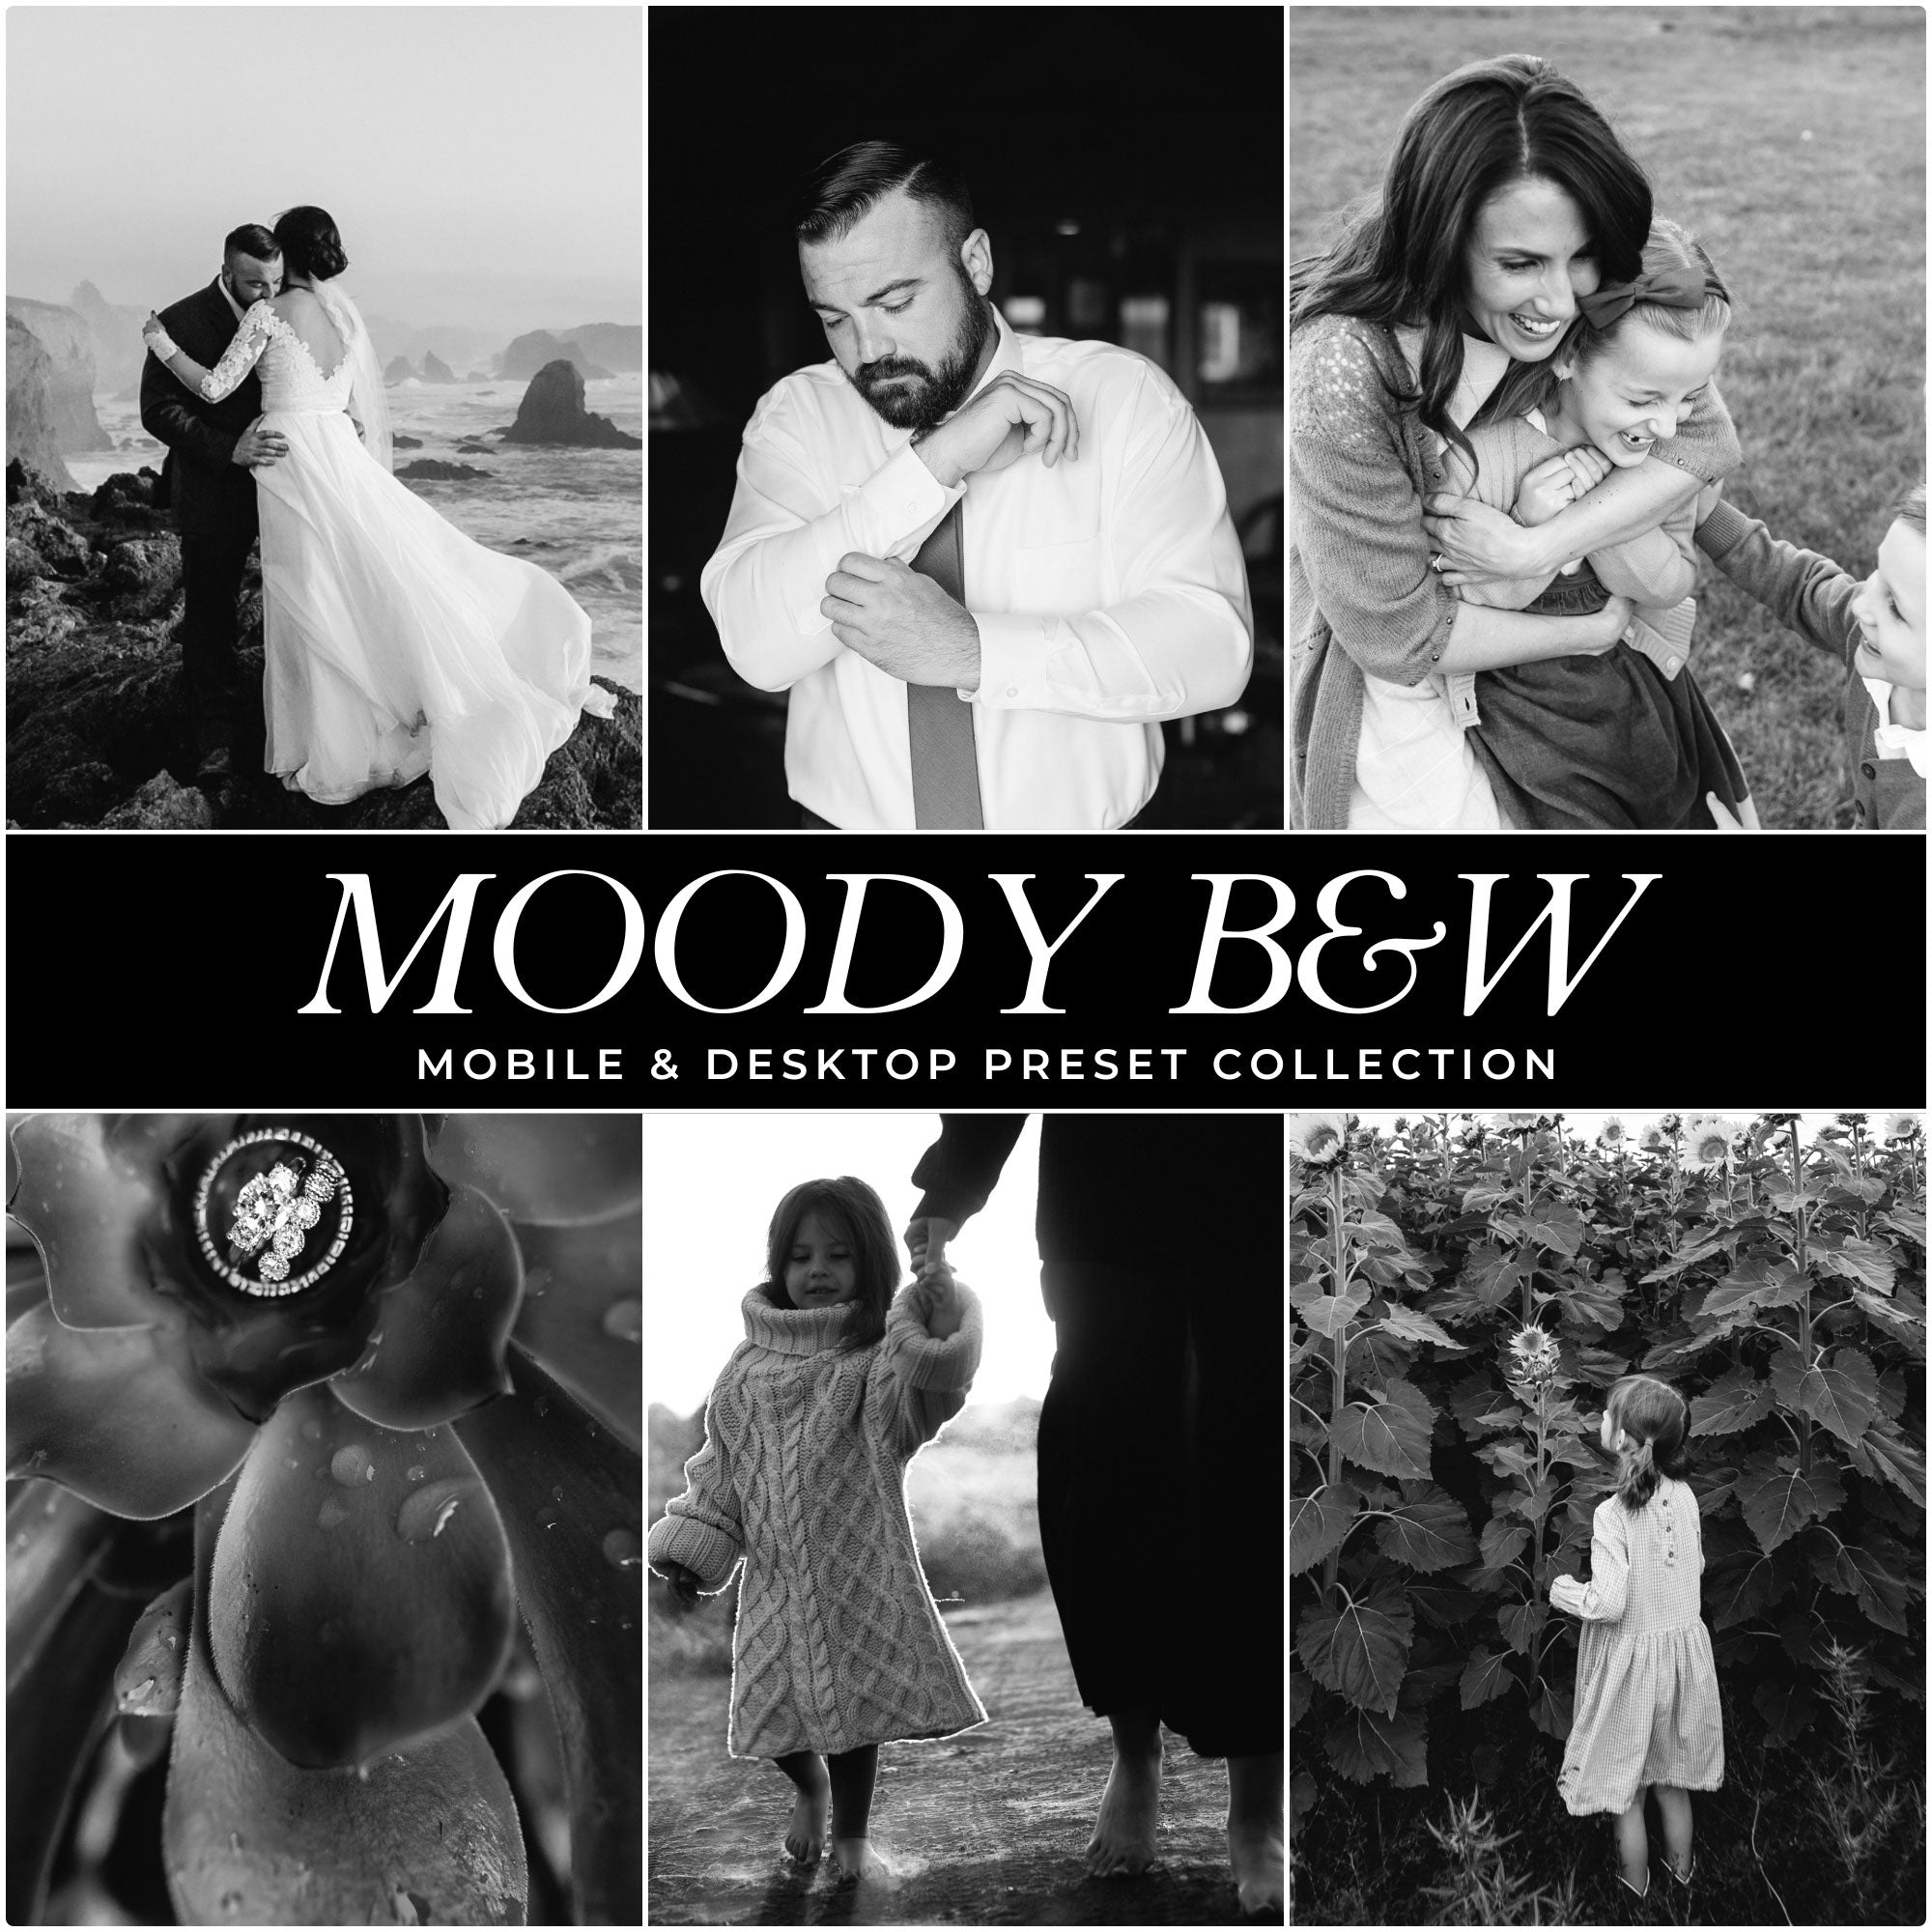 Moody Black And White Lightroom Presets For Photographers and Instagram Influencers Photo Editing In Adobe Lightroom By Lou And Marks Presets